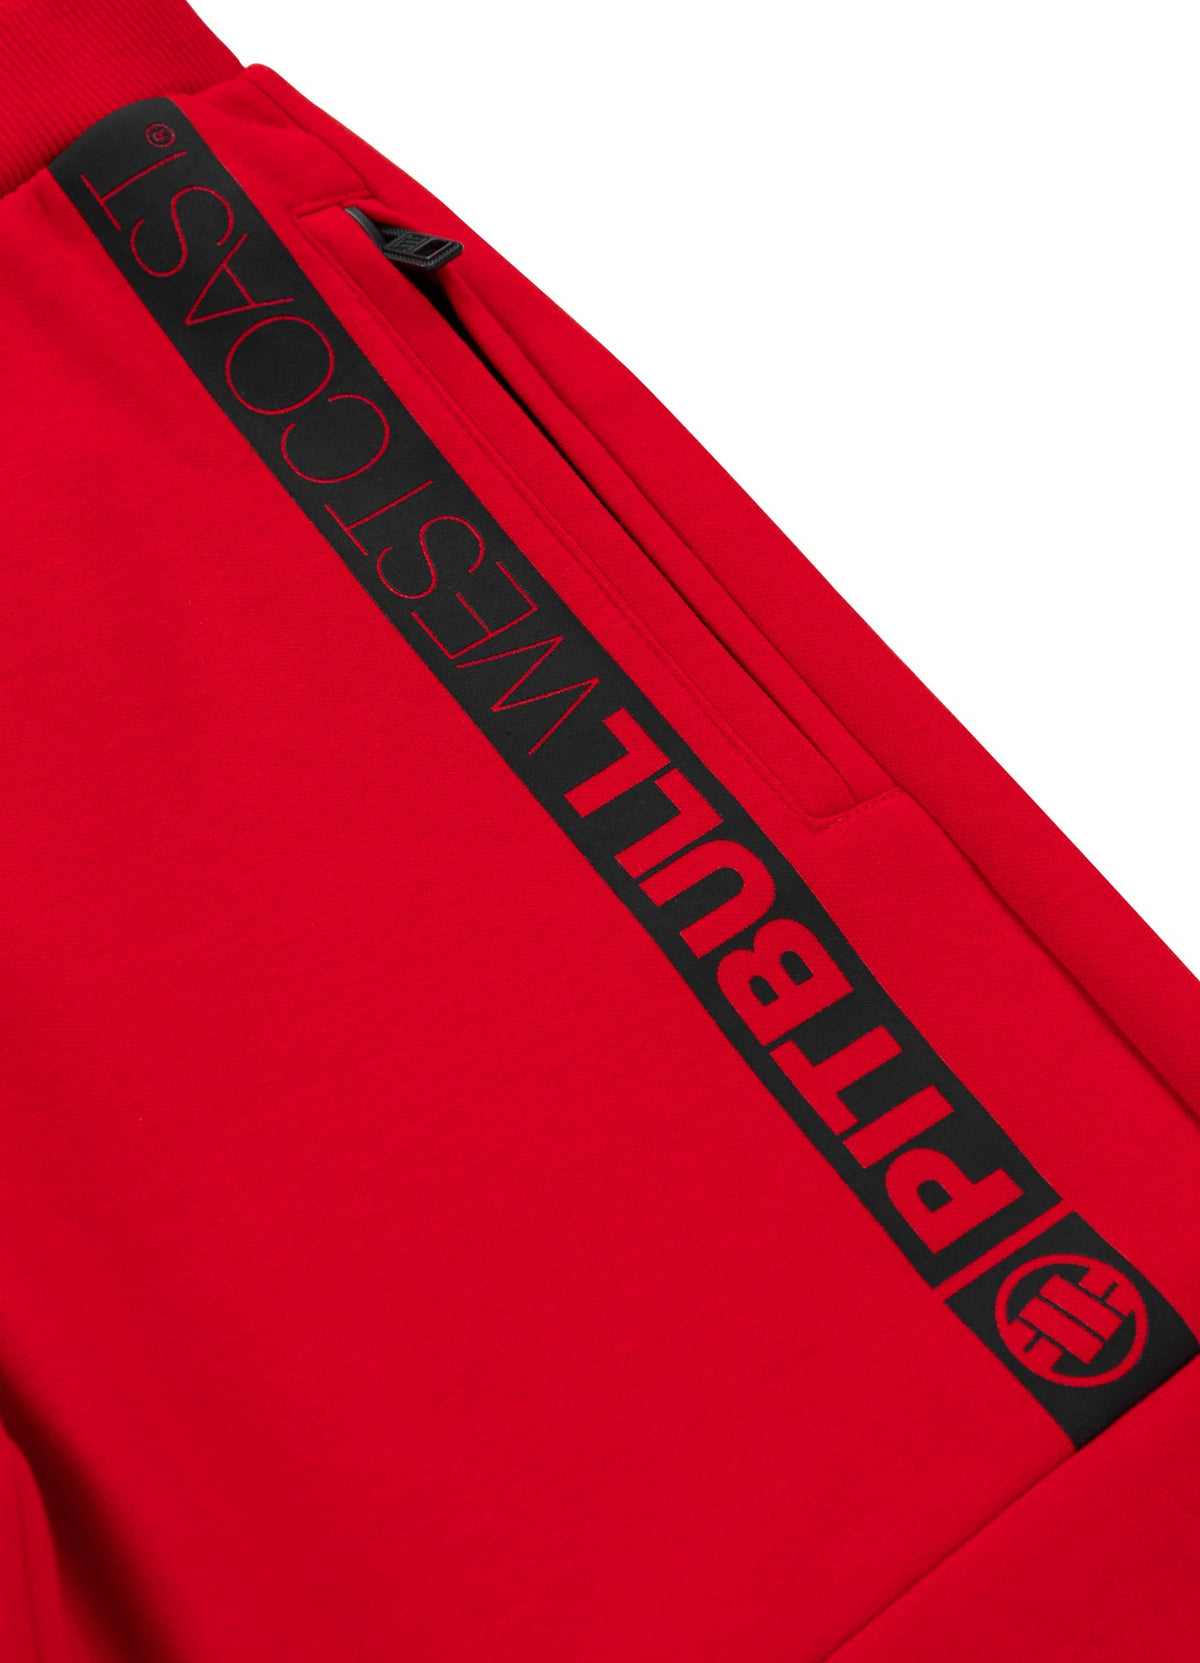 CHELSEA Red Track Pants